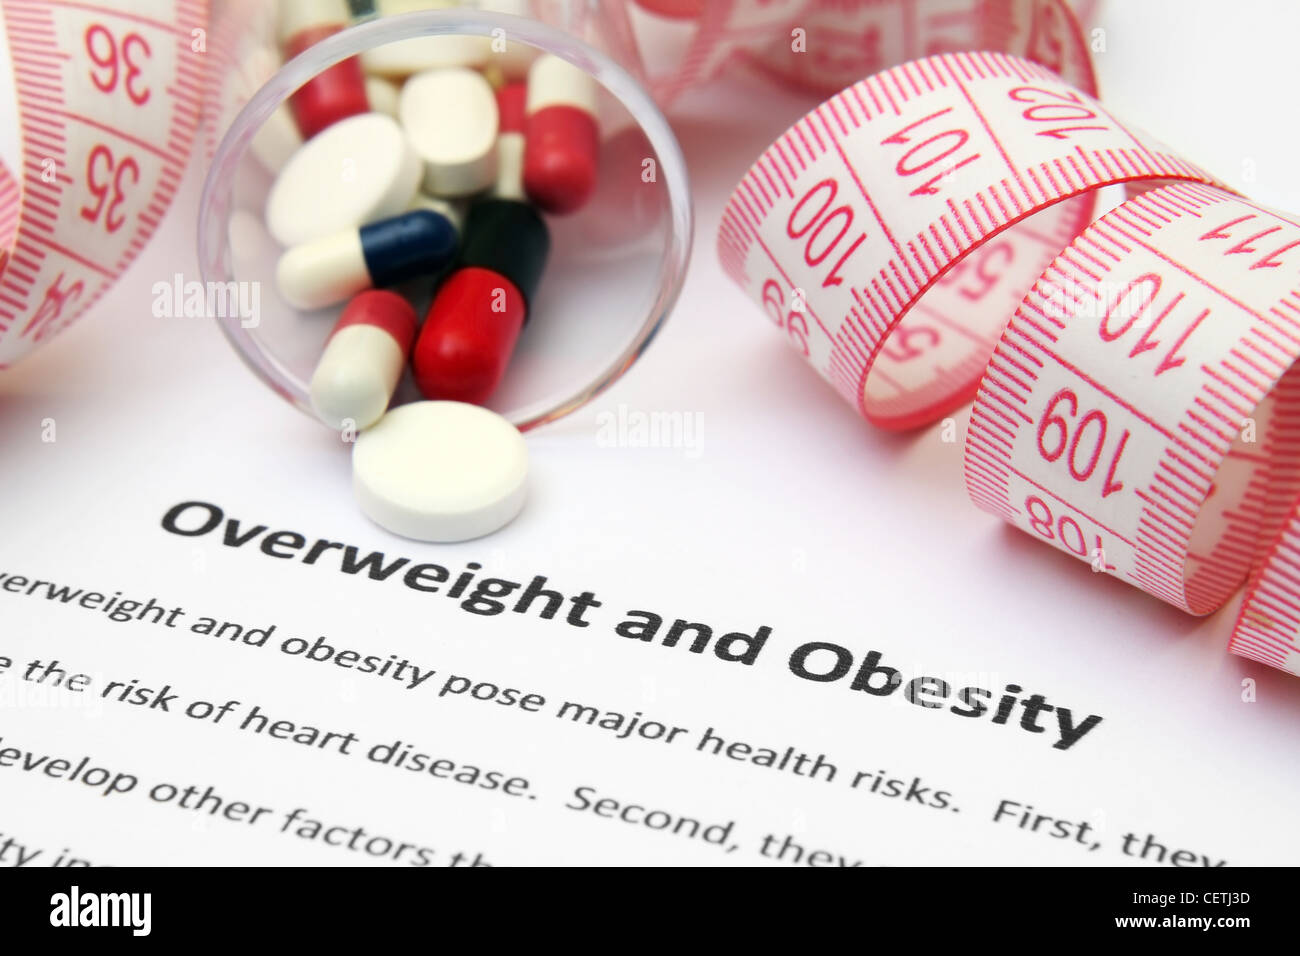 Obesity makes it harder to diagnose and treat heart disease - Mayo Clinic  News Network